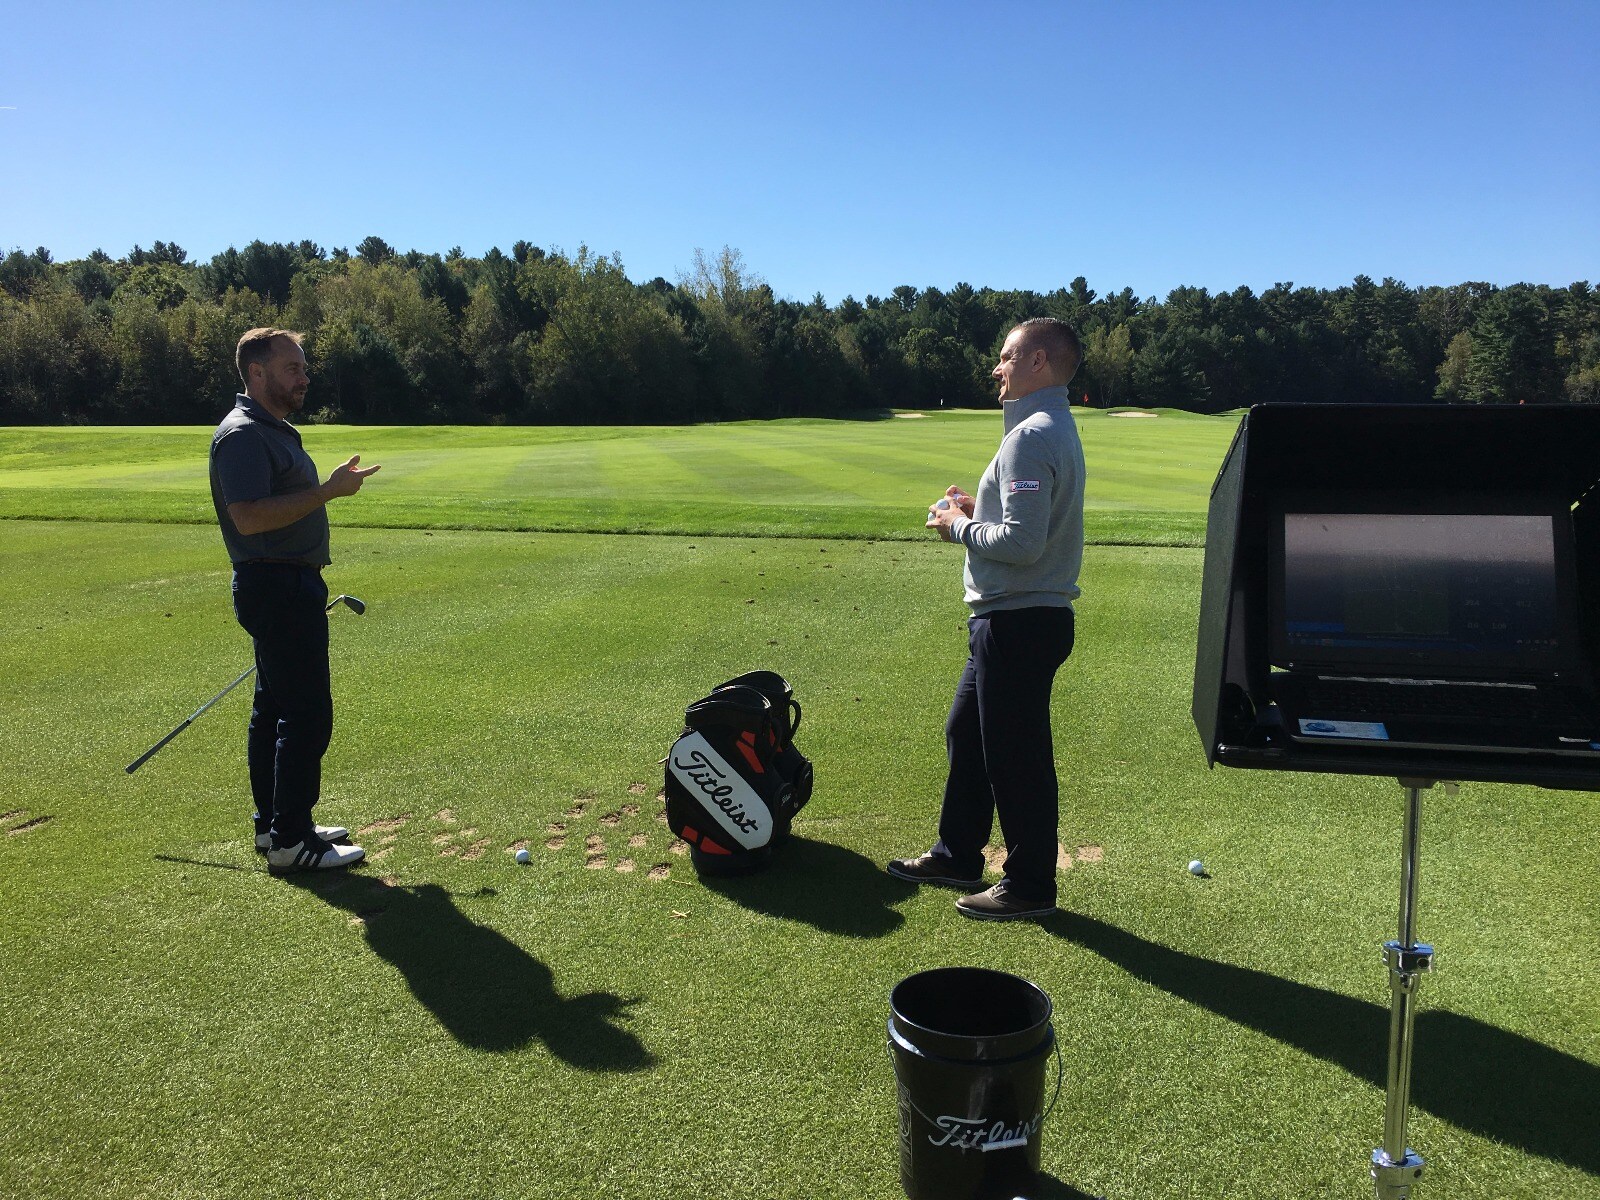 Our golf ball fitting expert explains all